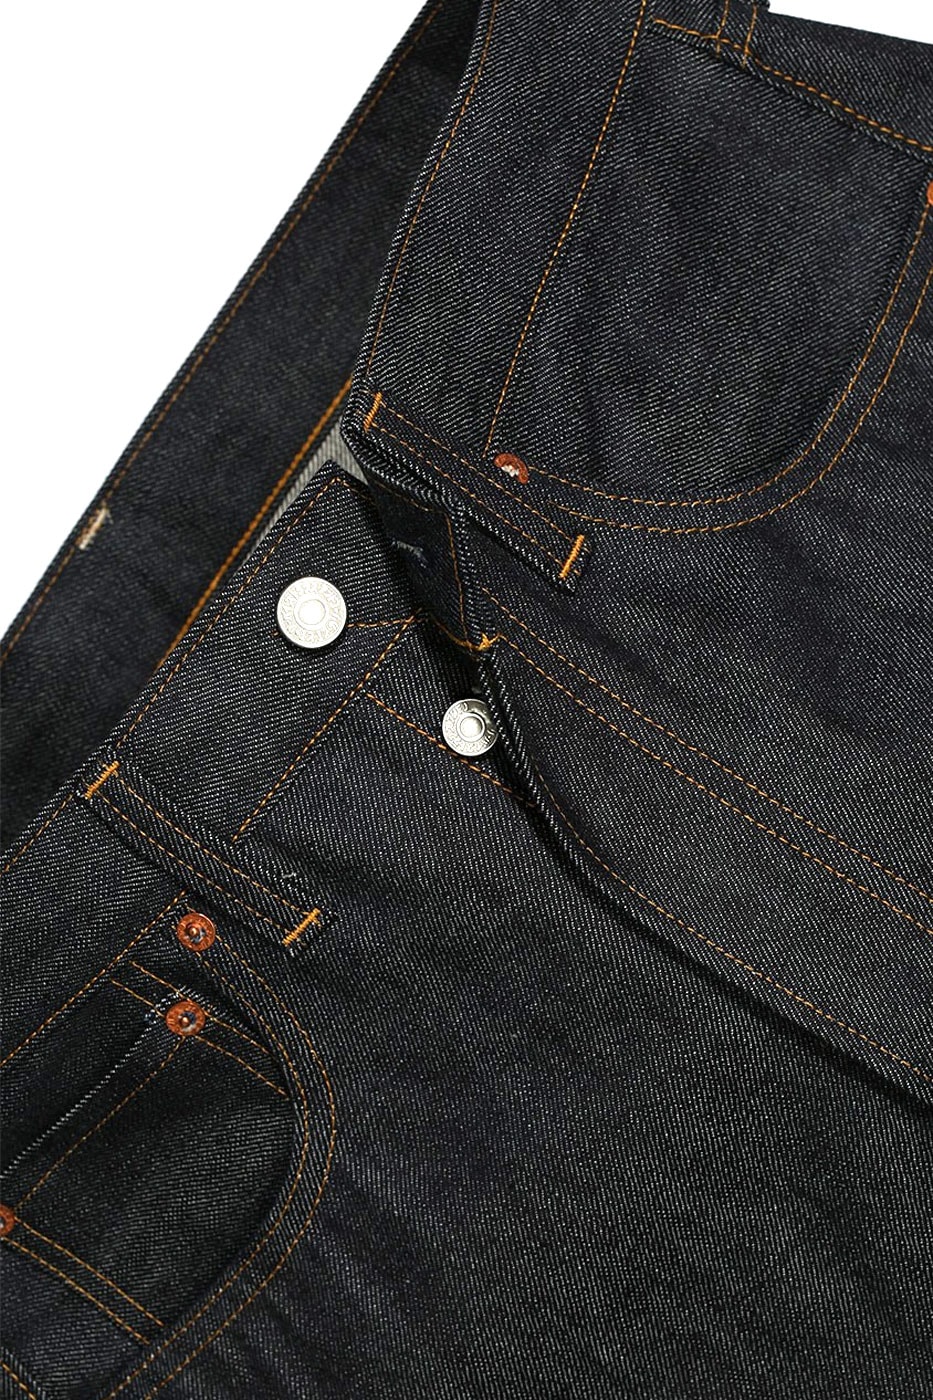 Levi's® Vintage Clothing Limited-Edition Japanese 501 Jeans fabric tags button text high waist line slim workwear selvedge denim red release info news